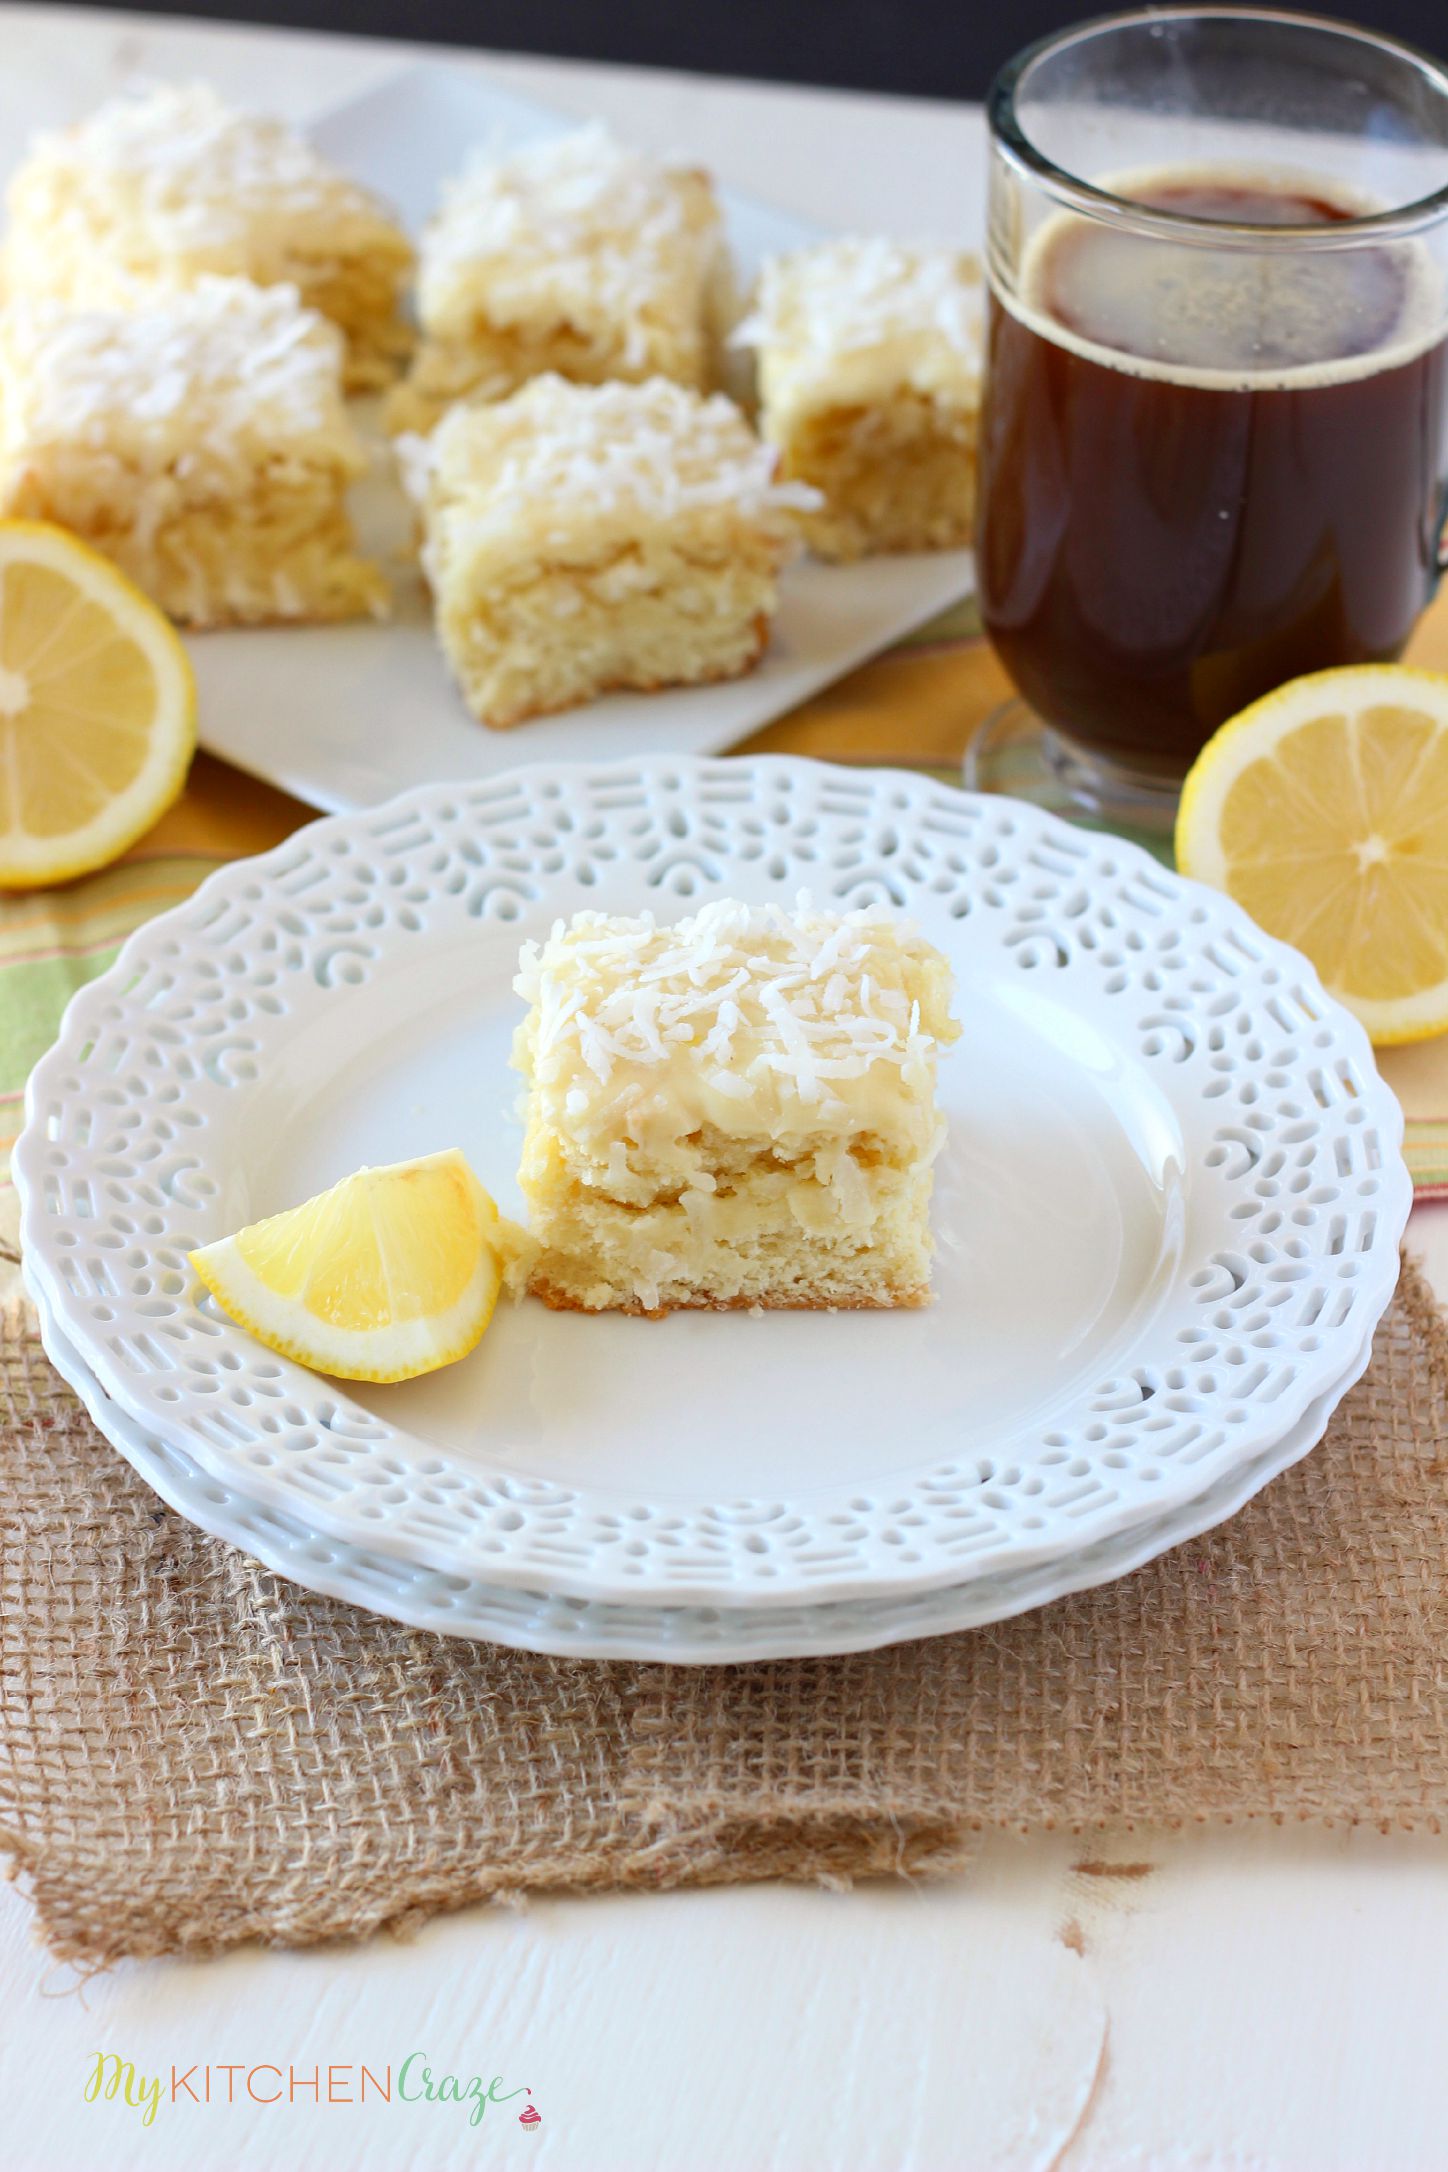 Coconut Lemon Blondies ~ mykitchencraze.com ~ Moist and flavorful coconut lemon blondies, frosted with a creamy white chocolate frosting. These blondies are great for any get together or just because. You'll love them!